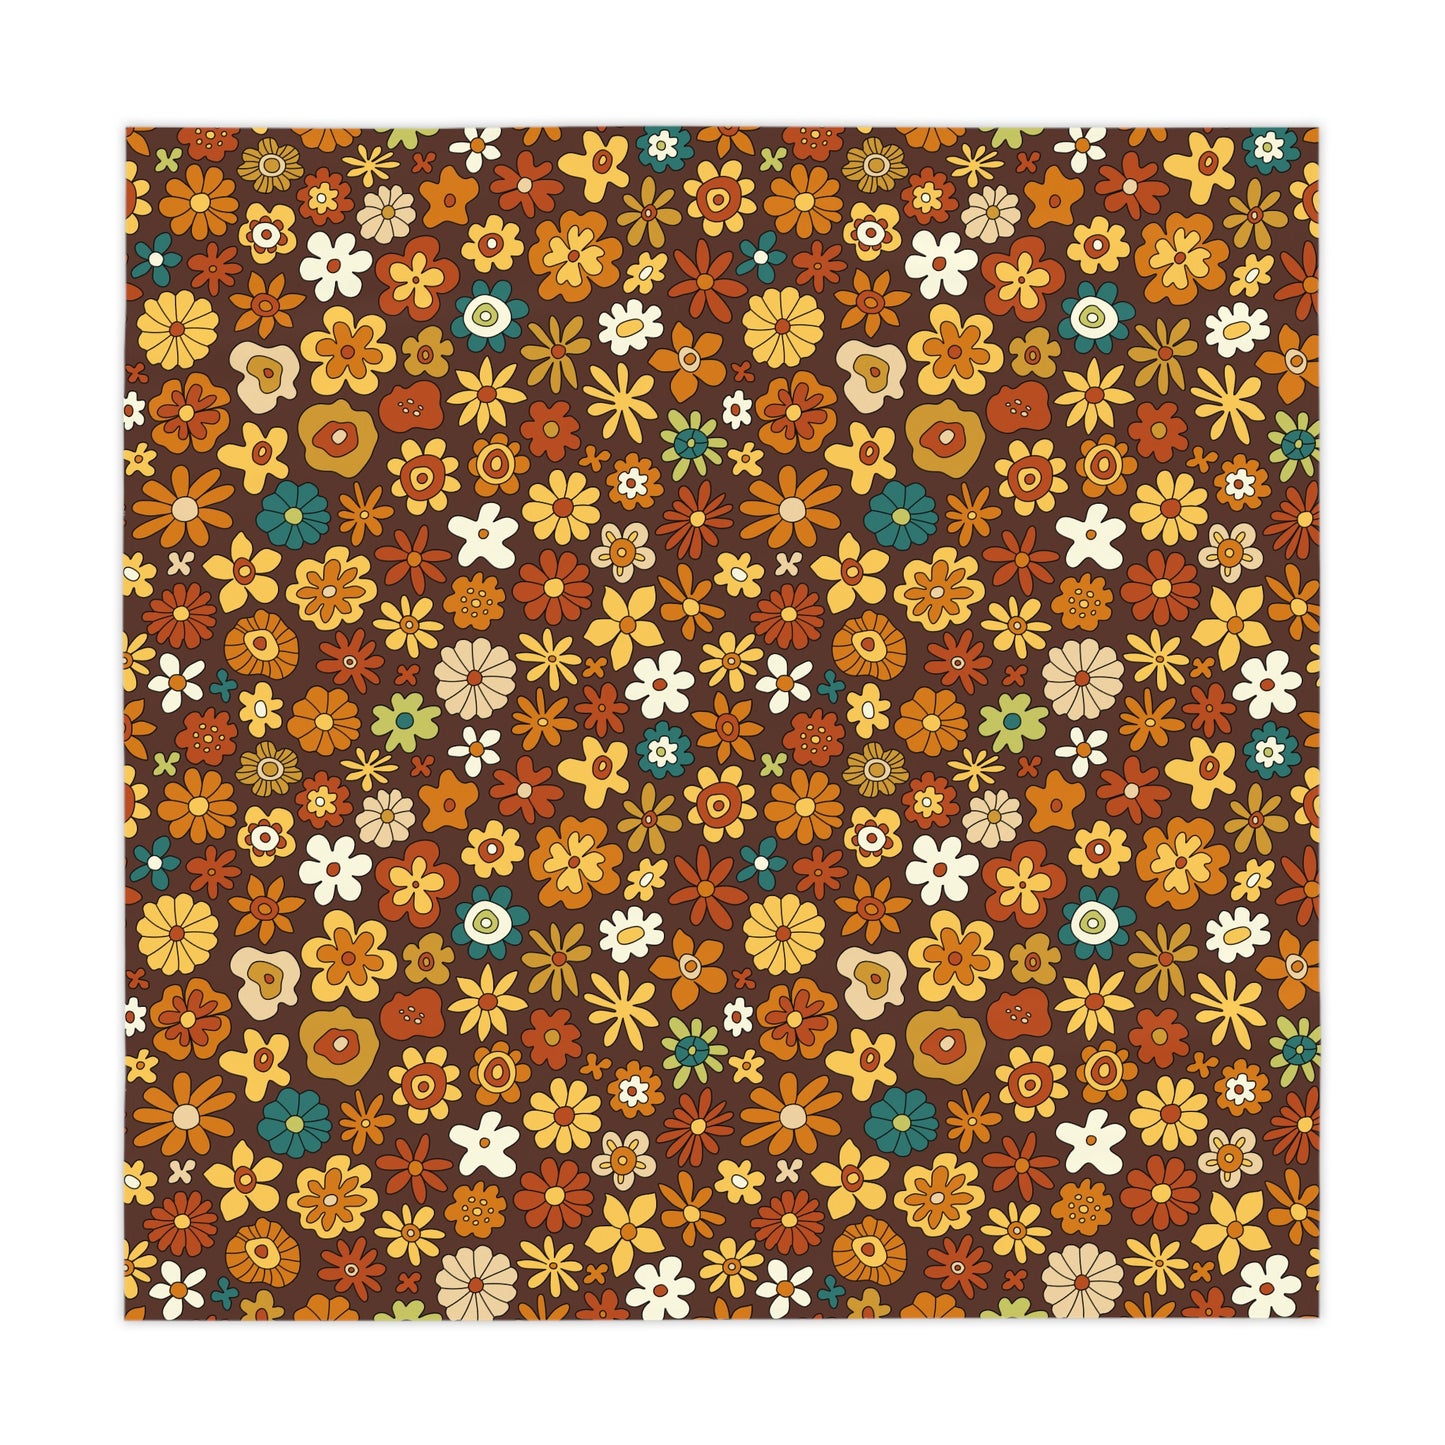 Retro 60s 70s Groovy Floral Mid Century Modern Brown Tablecloth